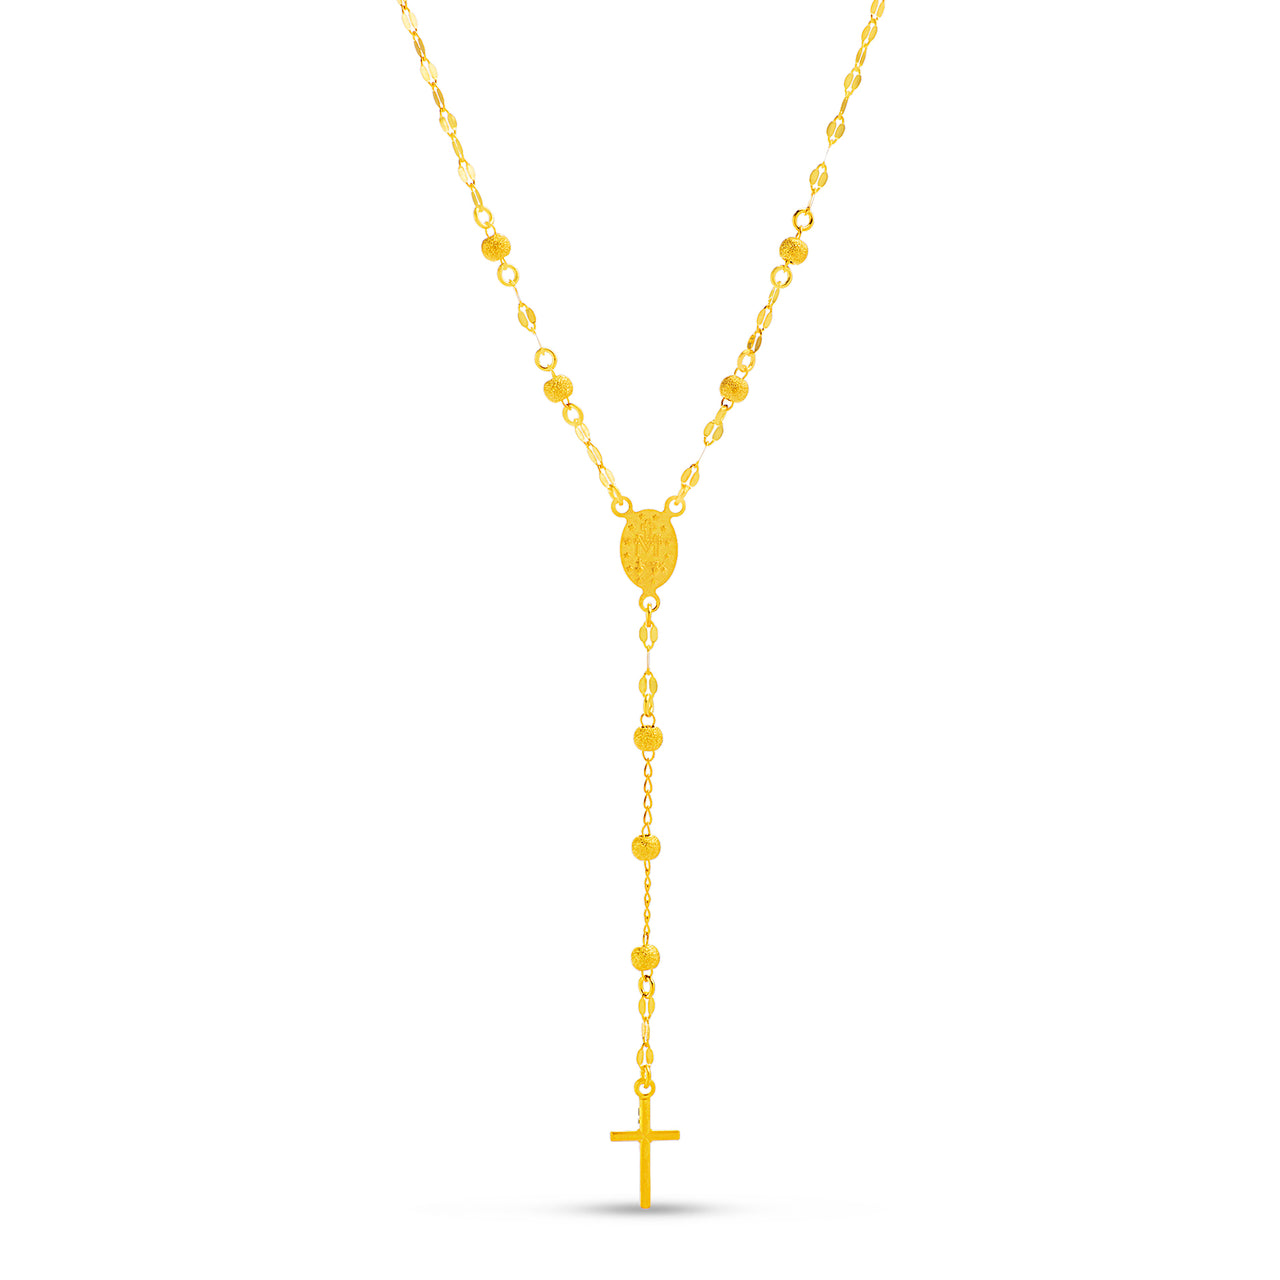 My Bible 18K Gold Plated Sterling Silver Y Cross Drop Rosary Necklace